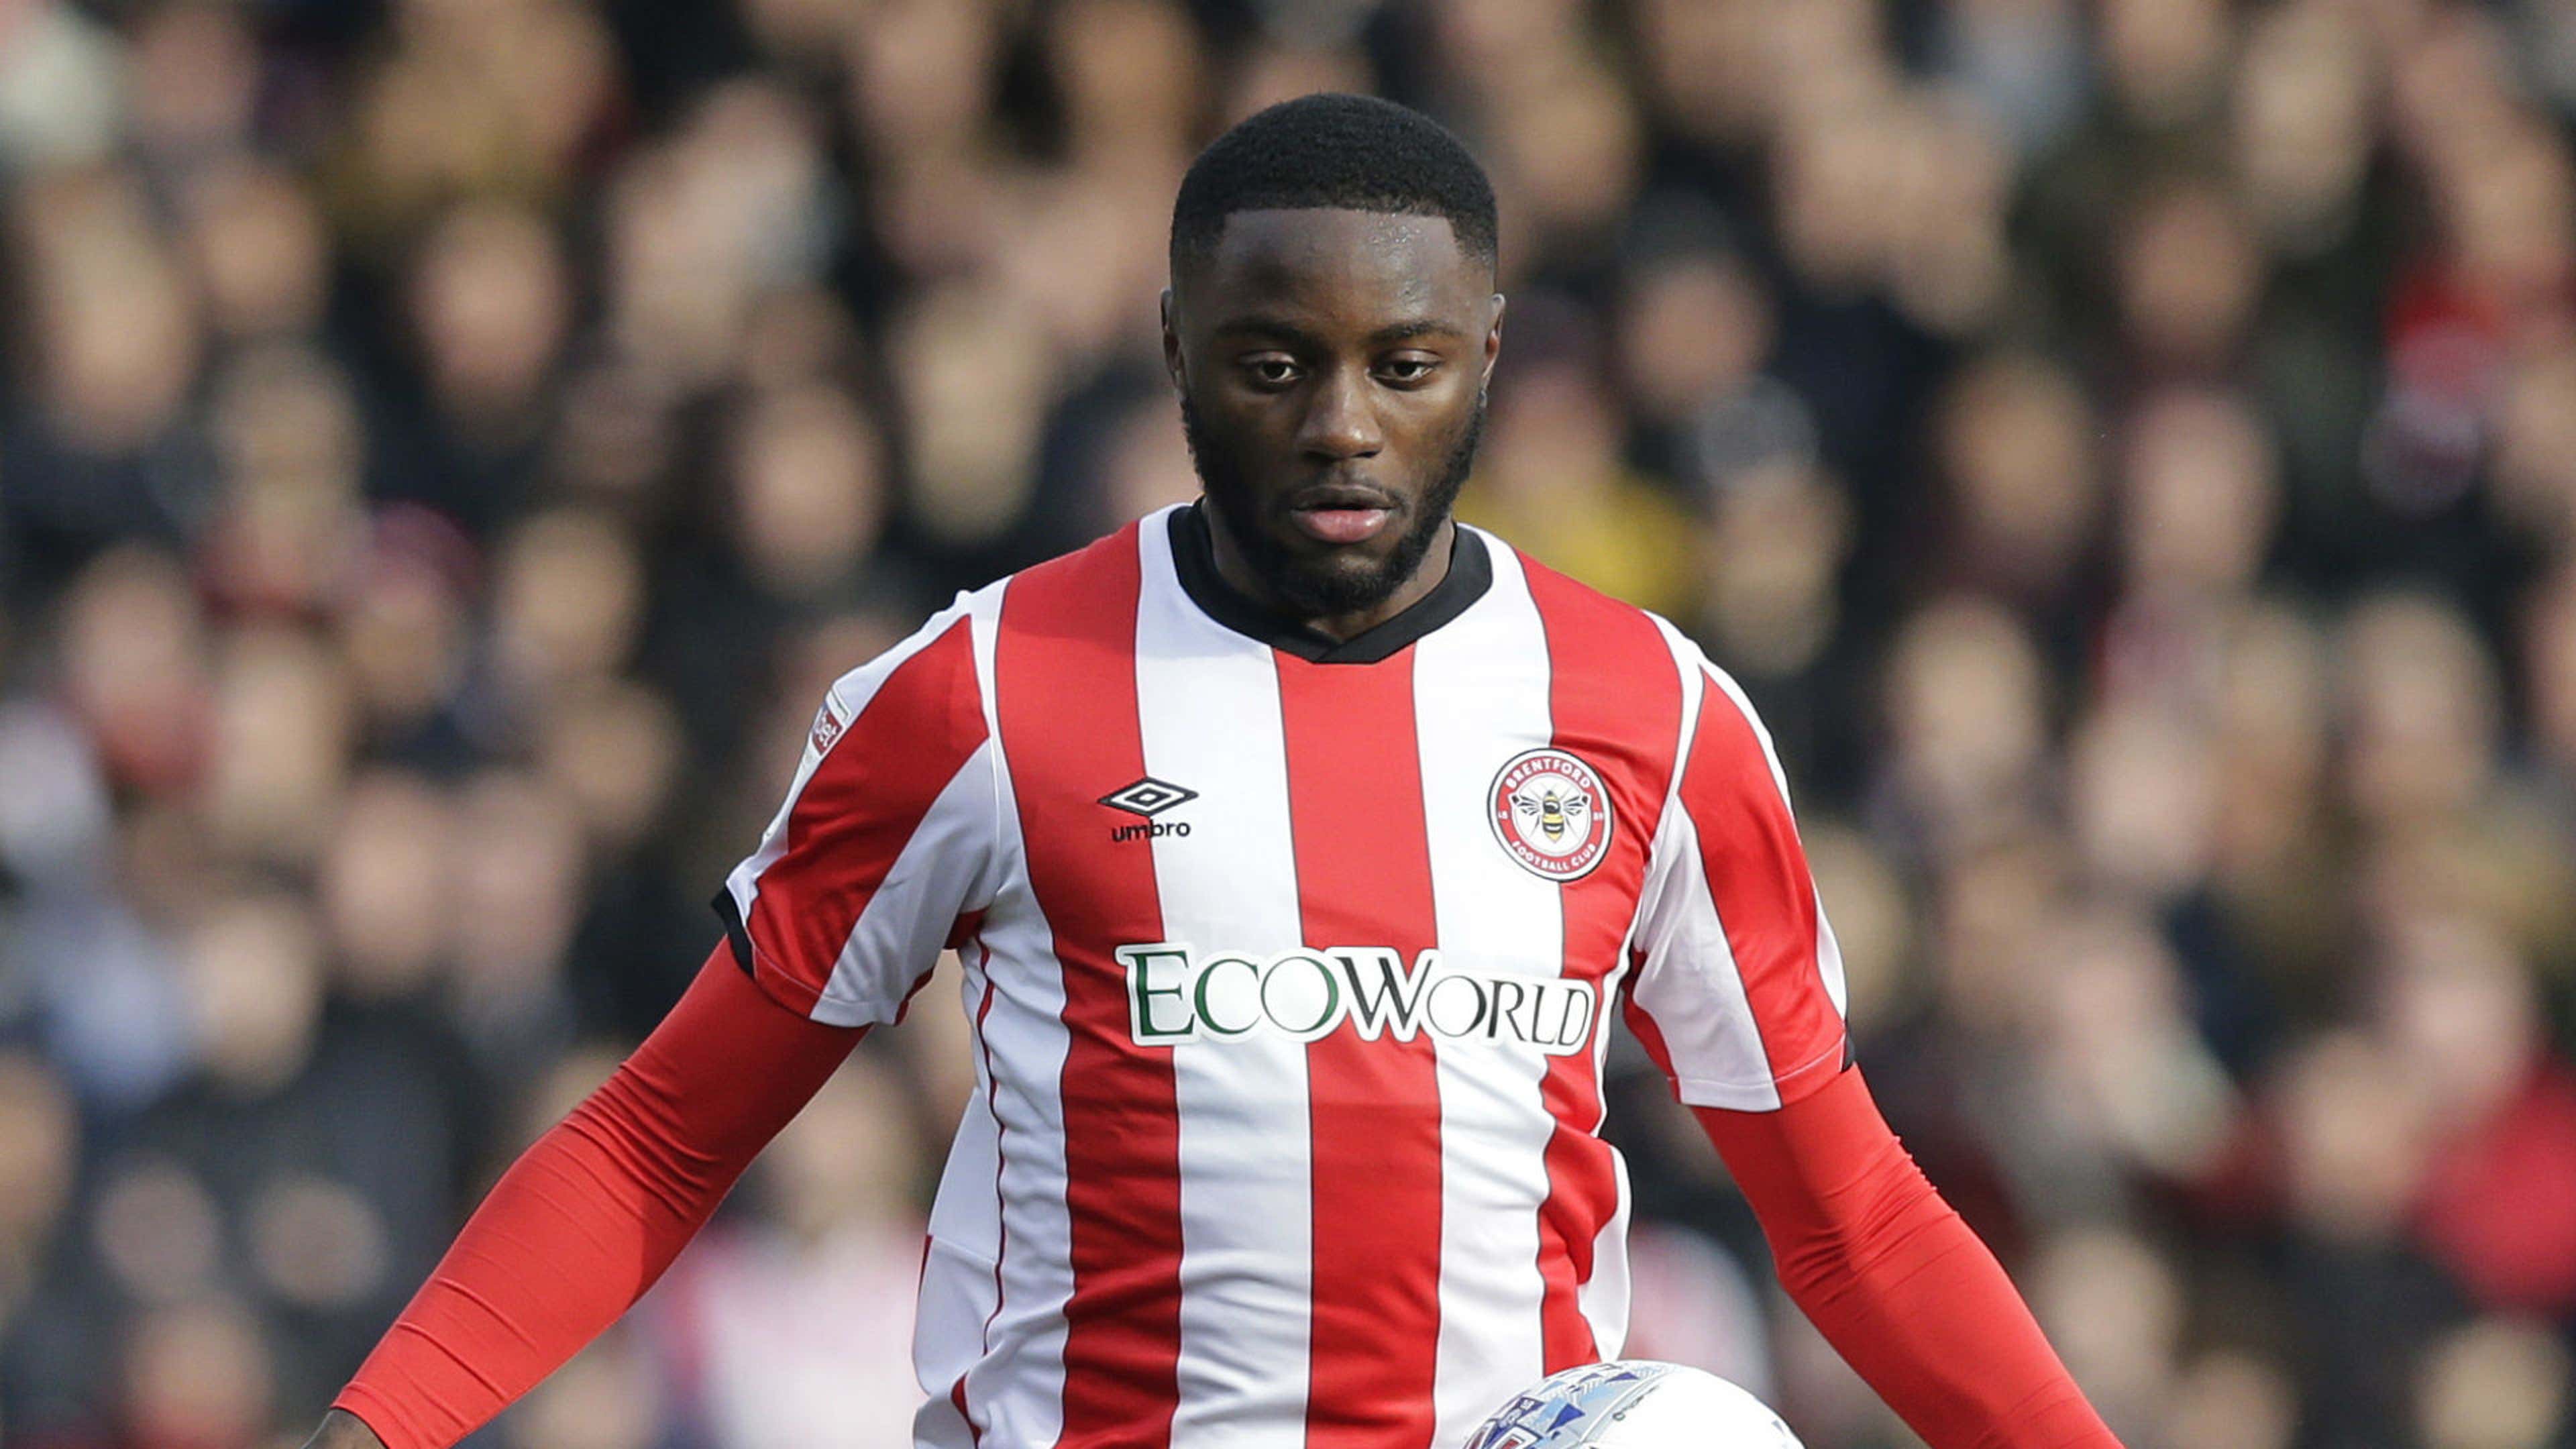  Football player Josh Dasilva, who plays as a midfielder for Brentford, is pictured playing a match.